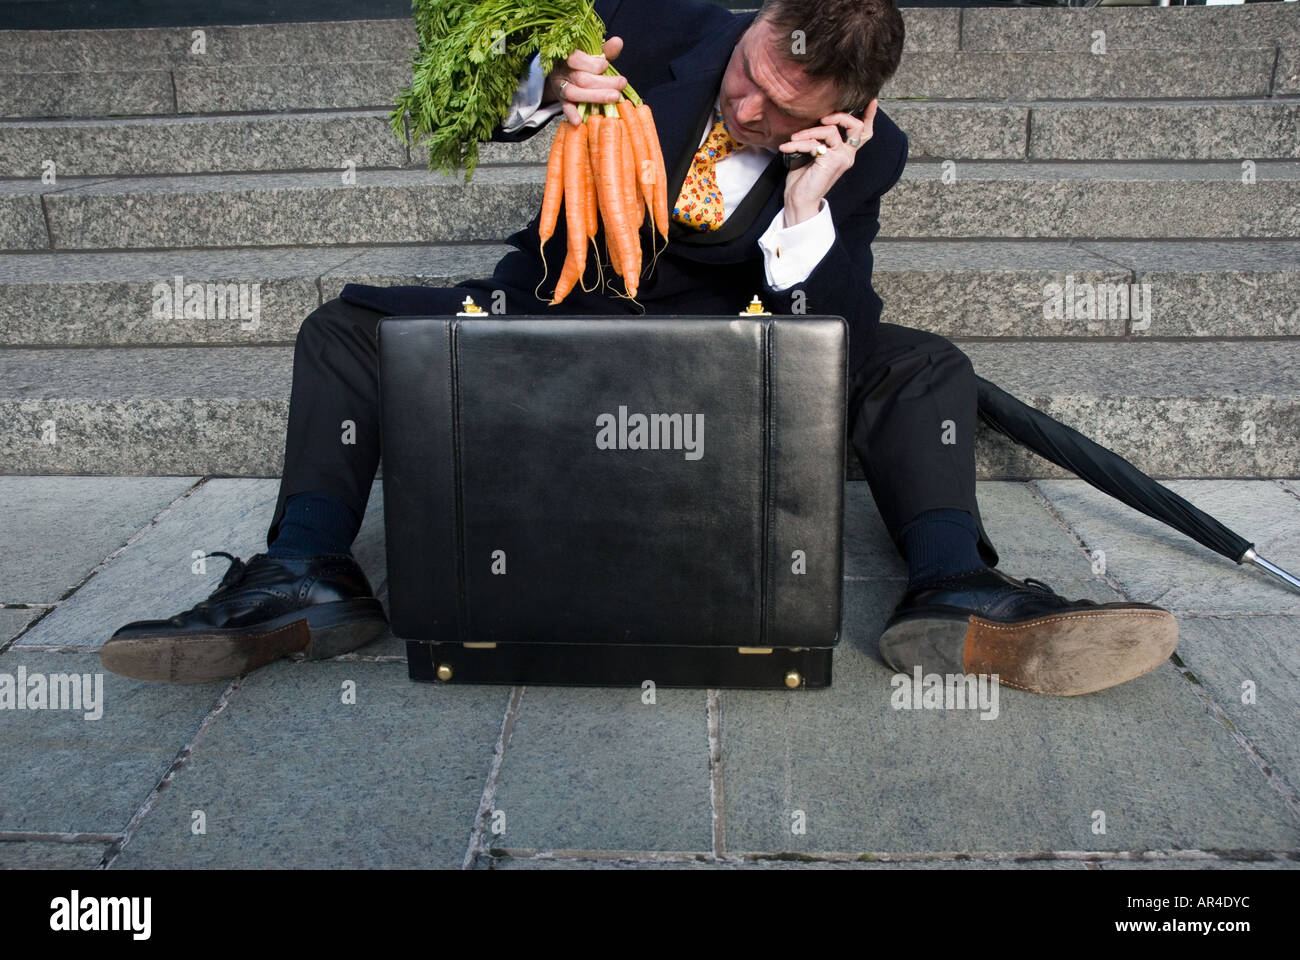 Bussiness man on mobilephone withbriefcase,sittng down on steps,holding a bunch of carrots Stock Photo